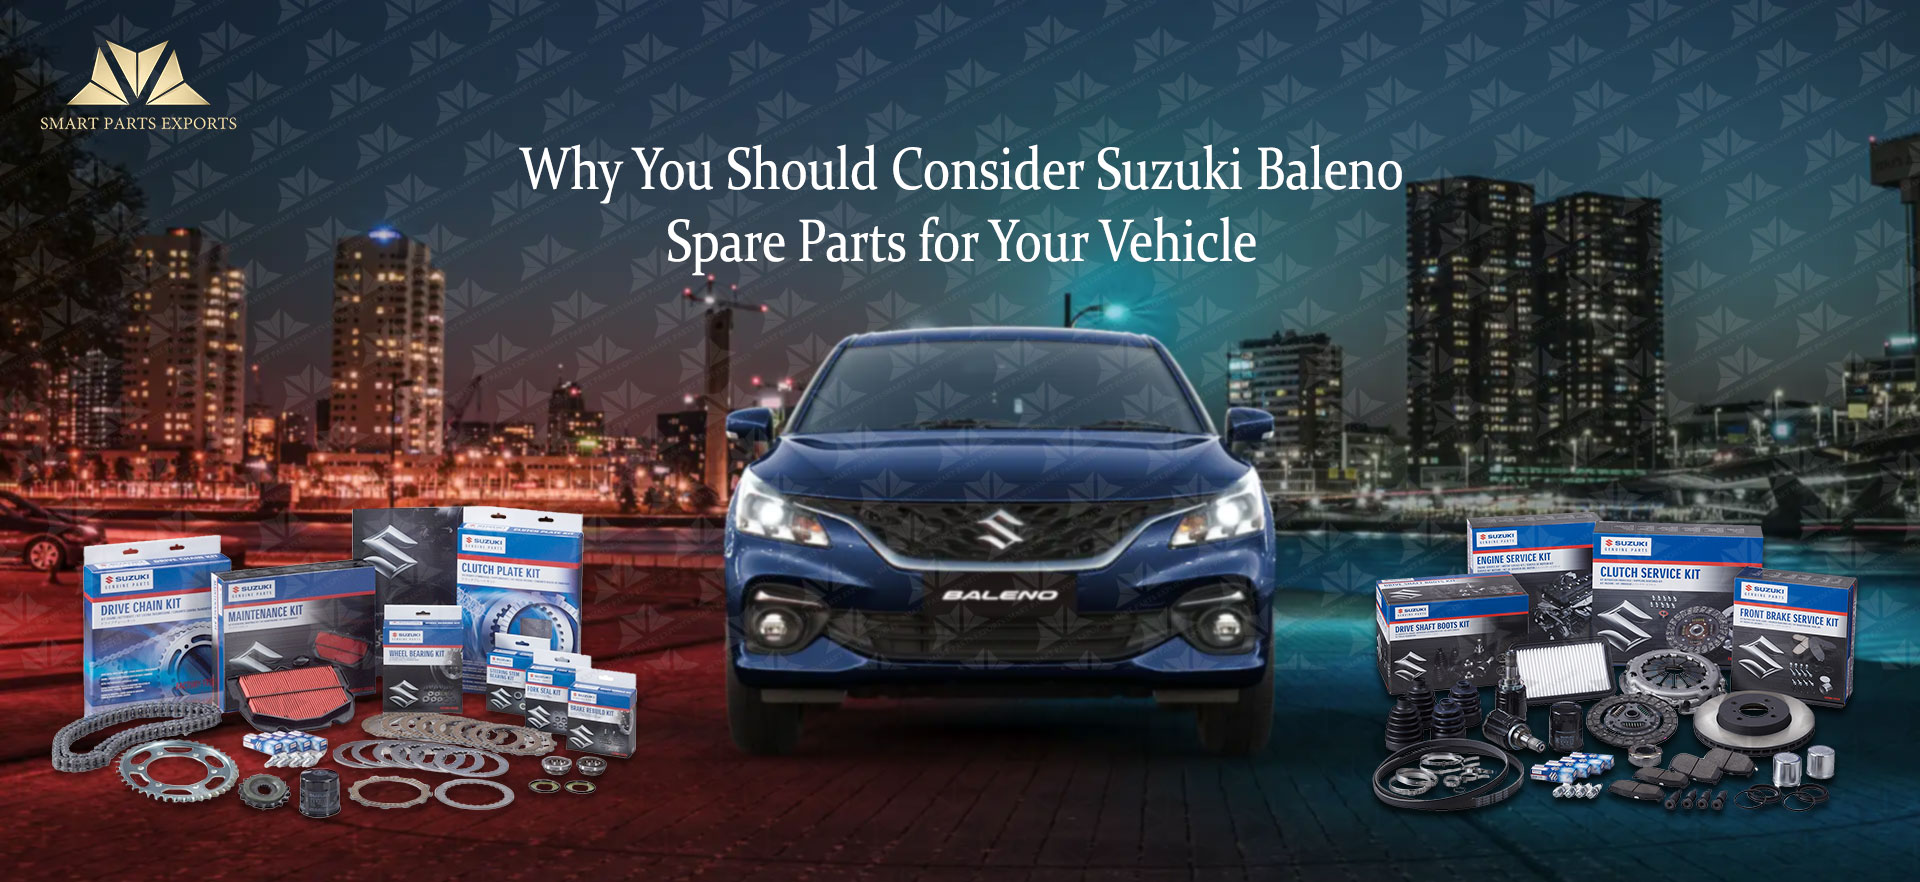 Why You Should Consider Suzuki Baleno Spare Parts for Your Vehicle